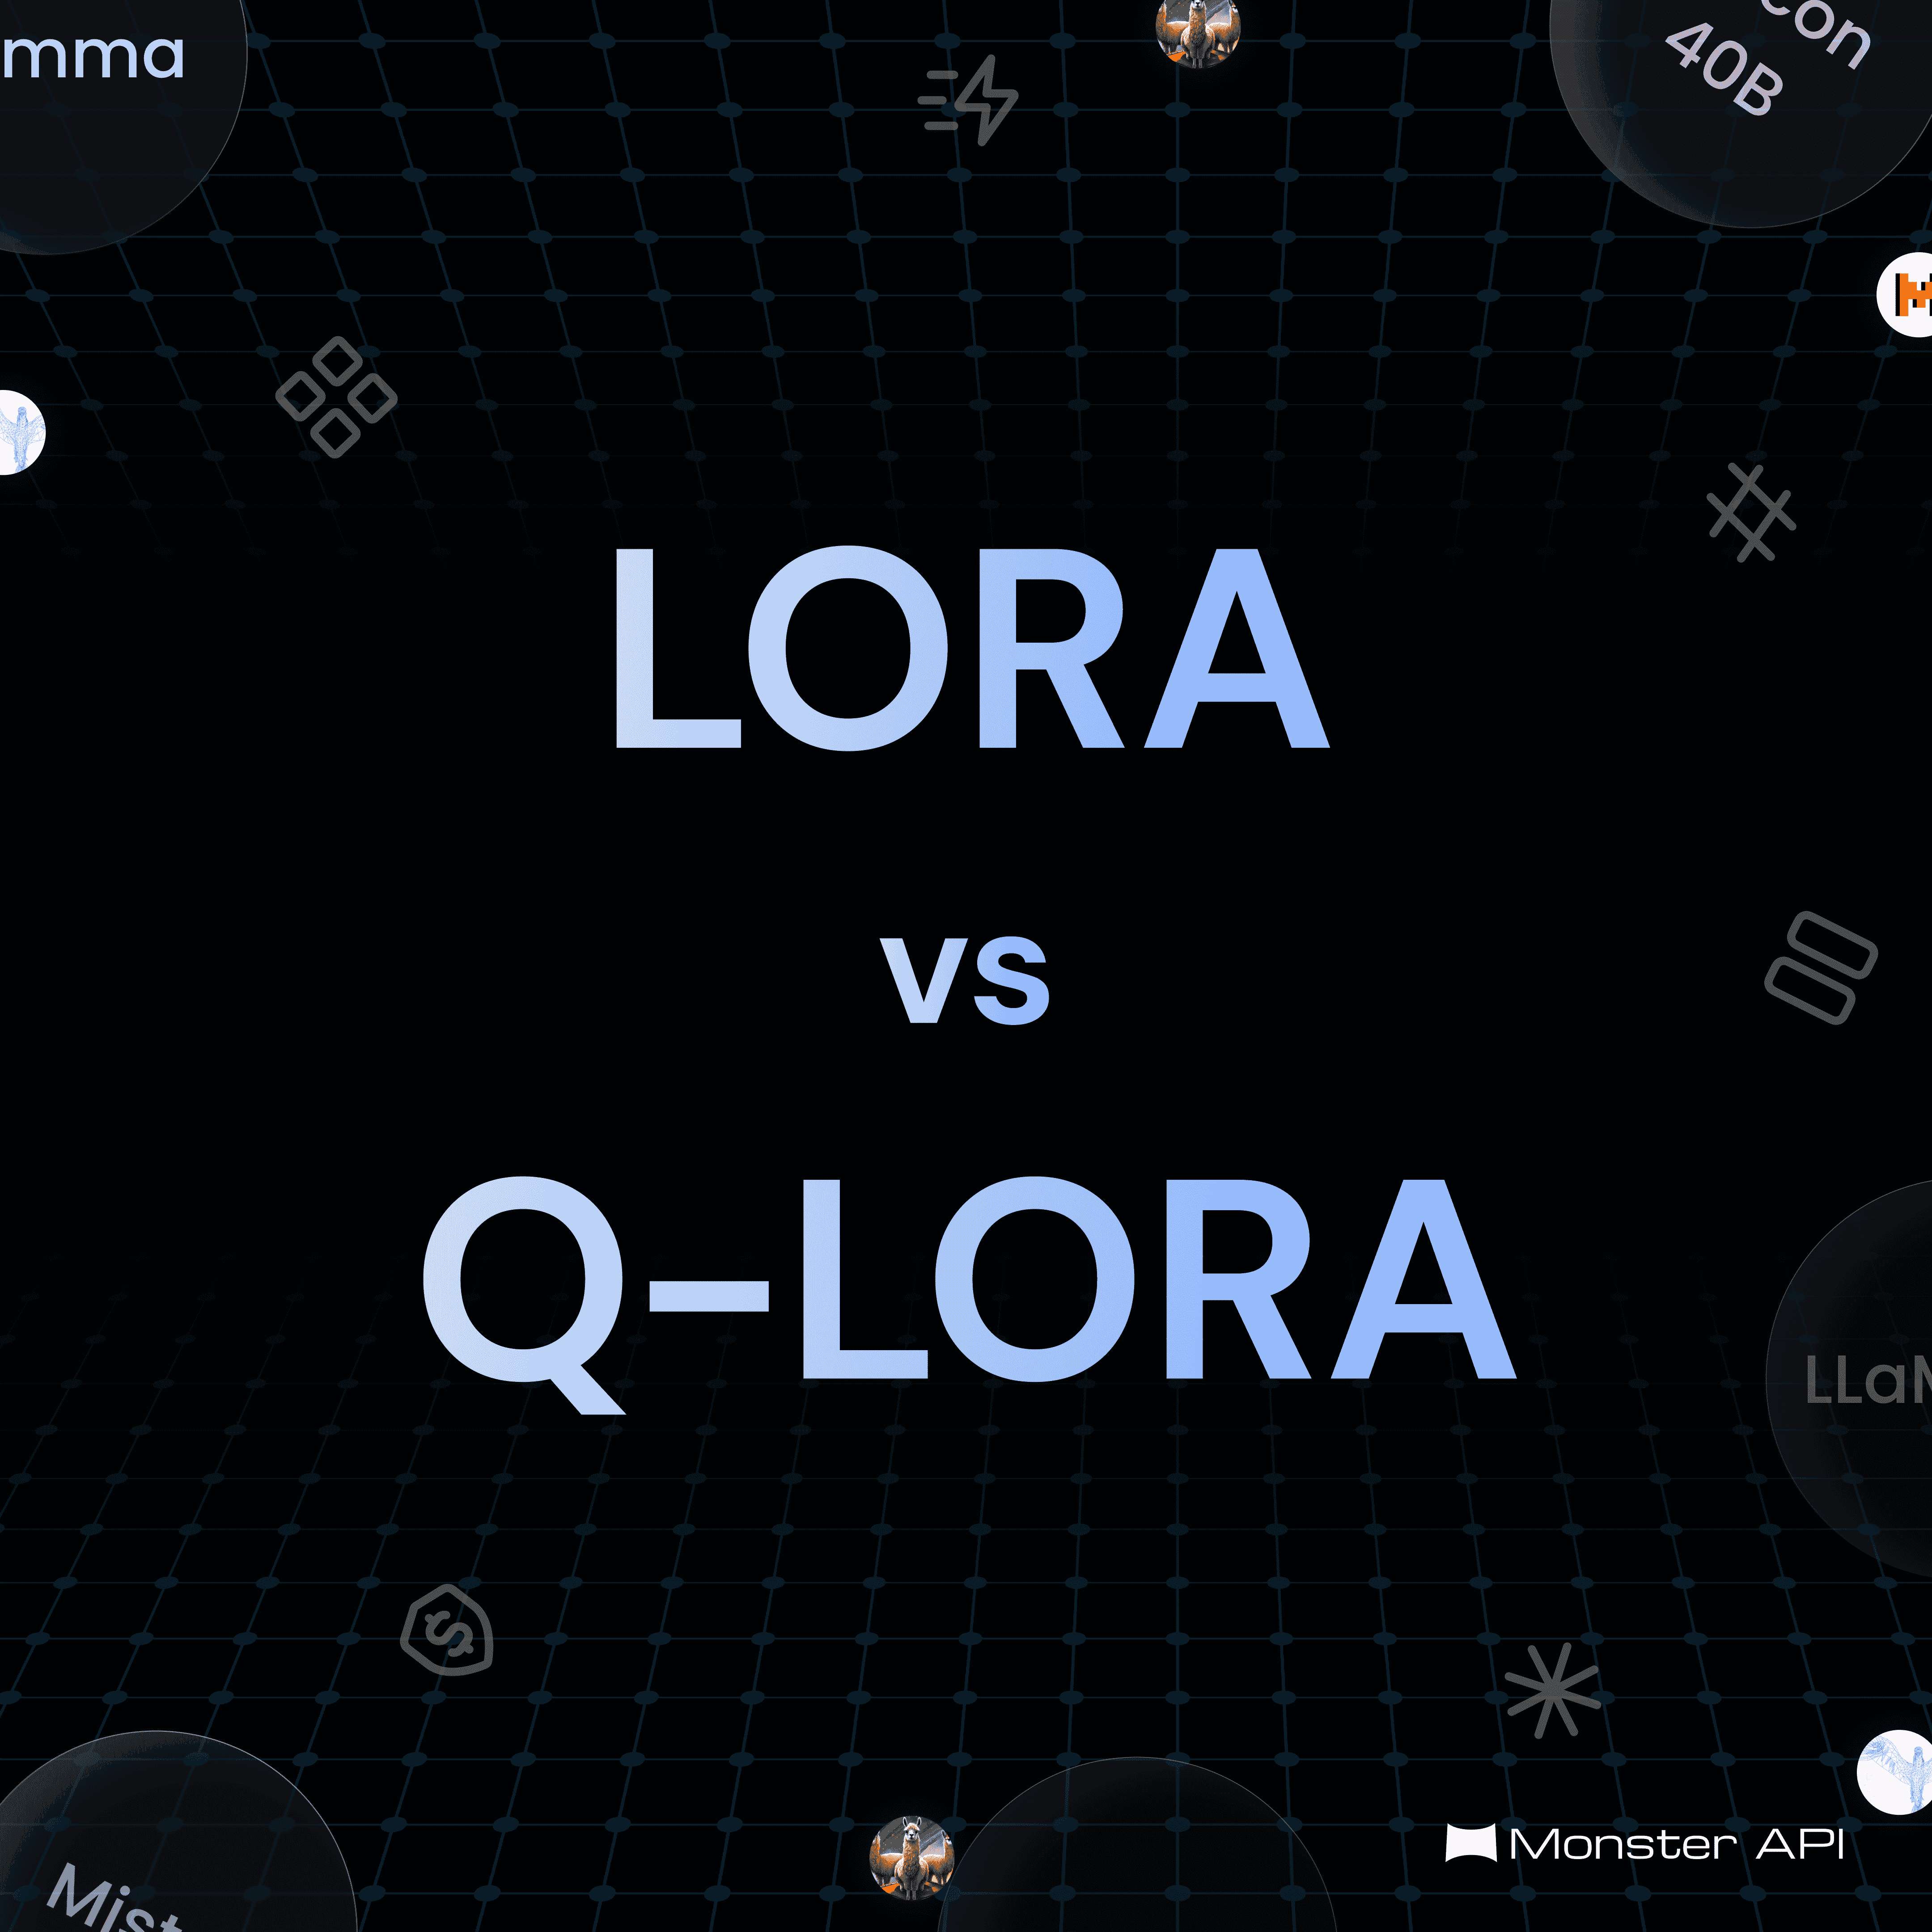 What is LORA and Q-LORA Finetuning?